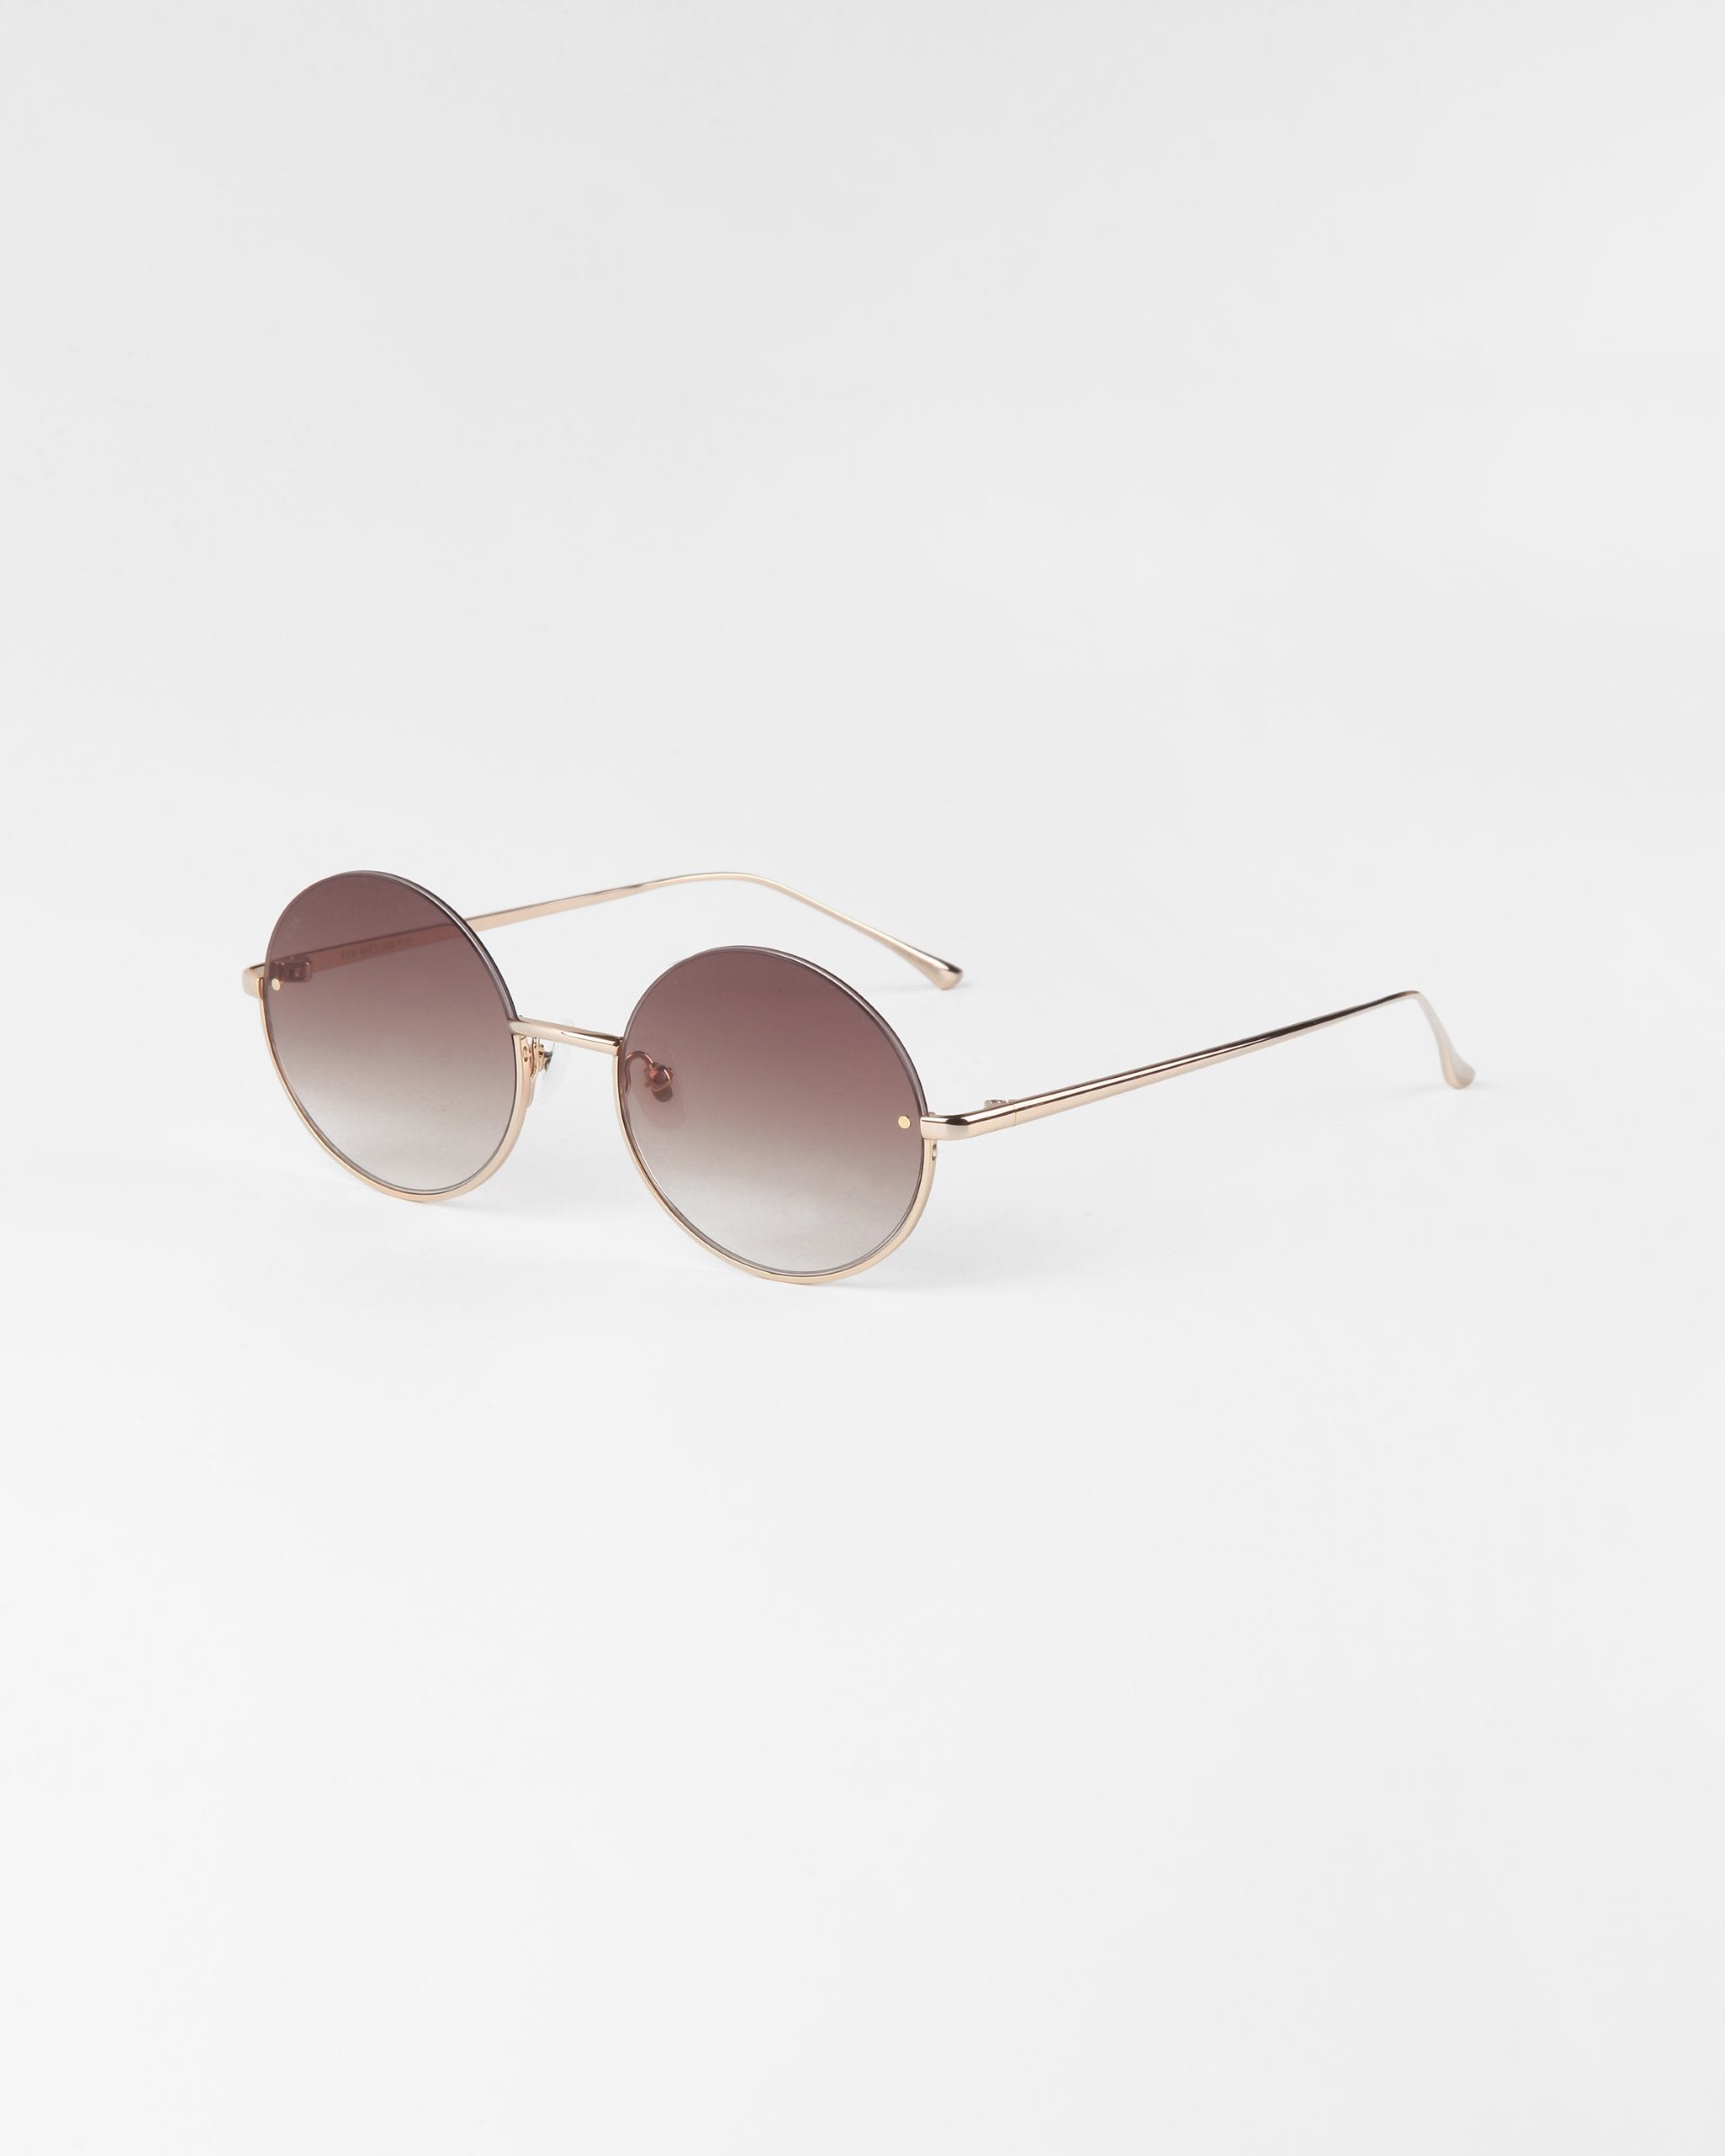 A pair of round sunglasses with thin 18-karat gold plated frames and brown gradient lenses is displayed against a plain white background. The Skyline by For Art&#39;s Sake® features a minimalist design with straight arms and nose pads for comfort.